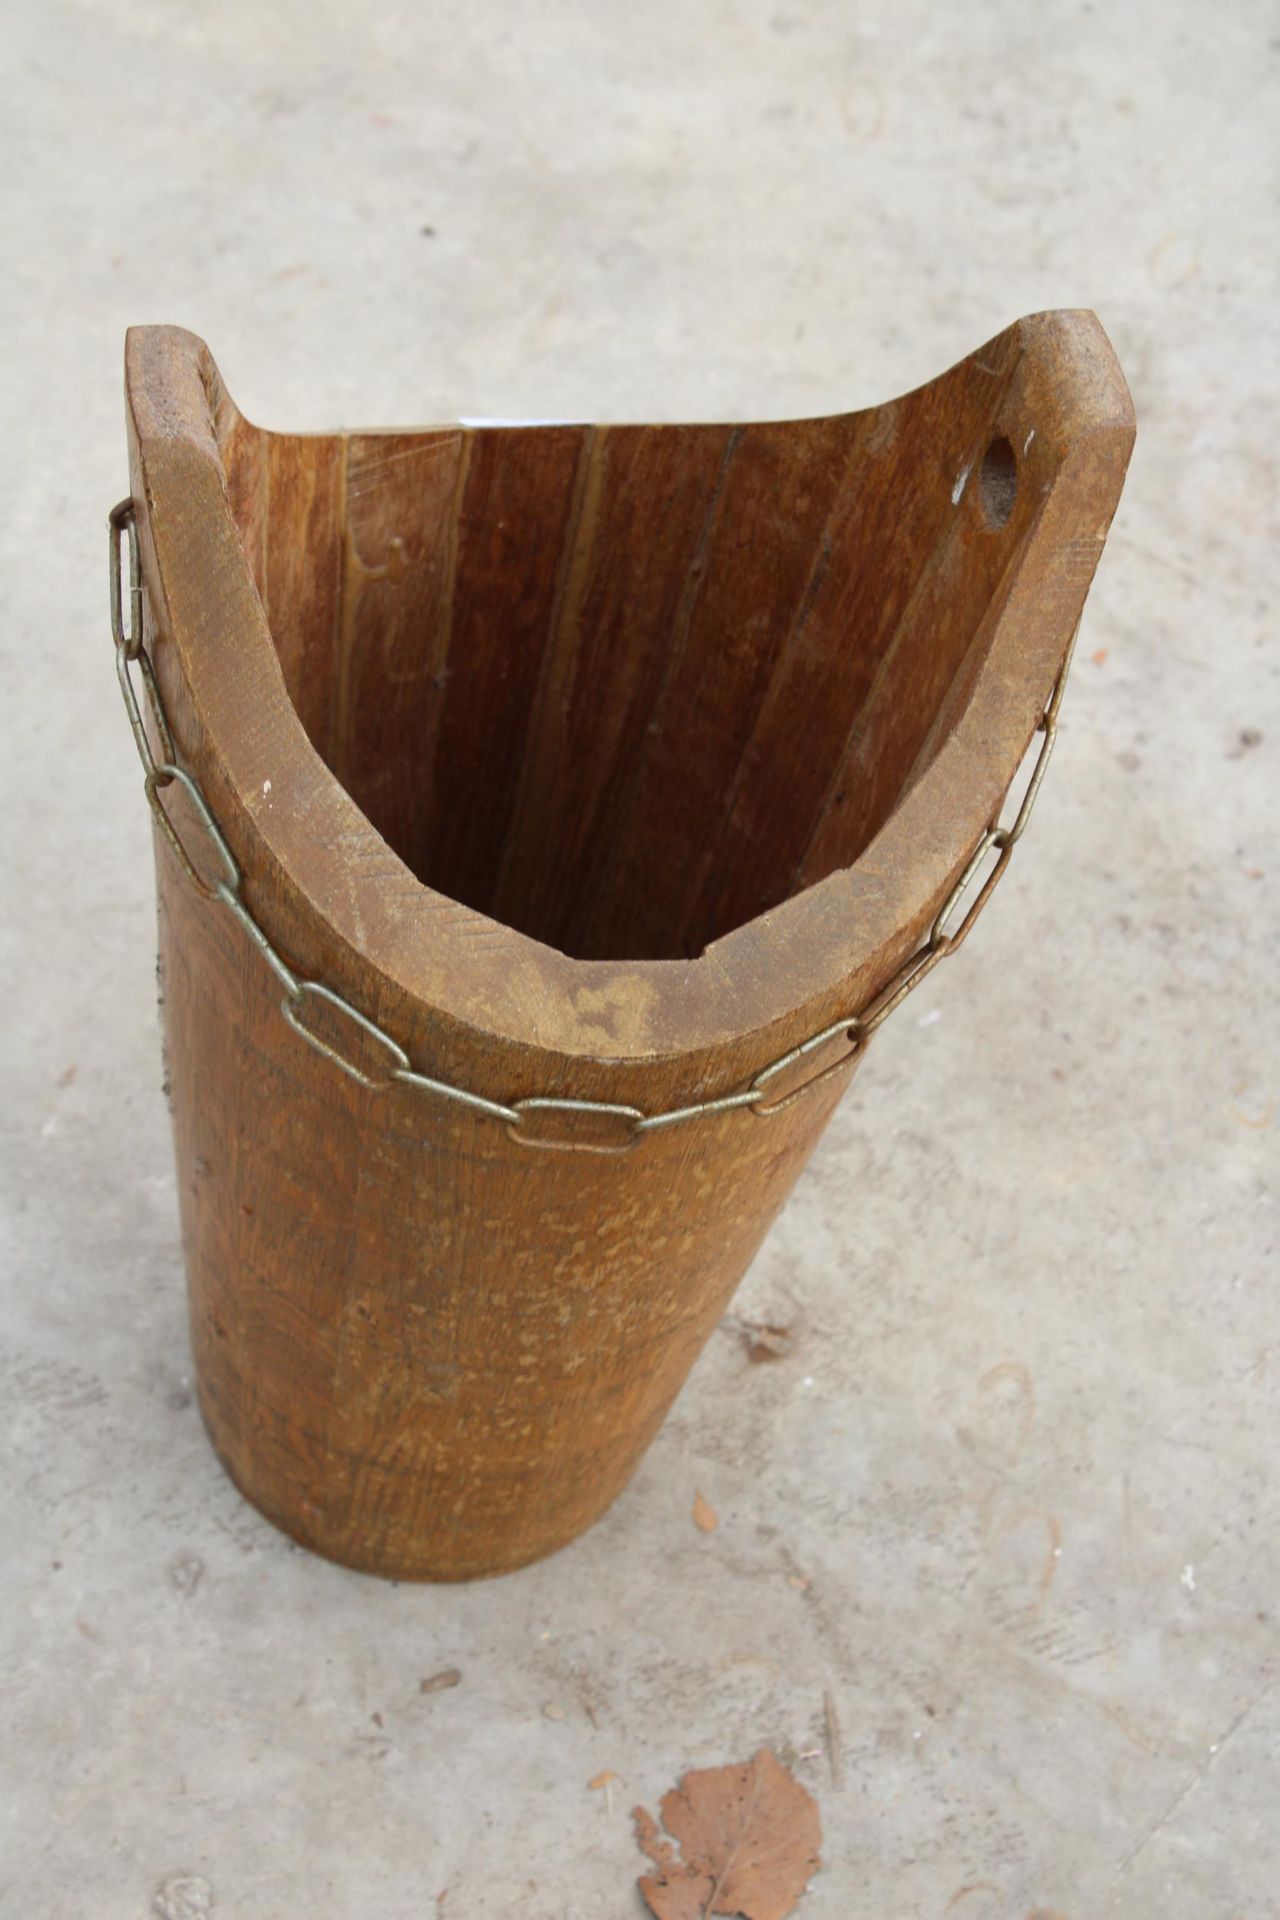 A WOODEN HANGING PAIL BUCKET (H:48CM) - Image 2 of 3